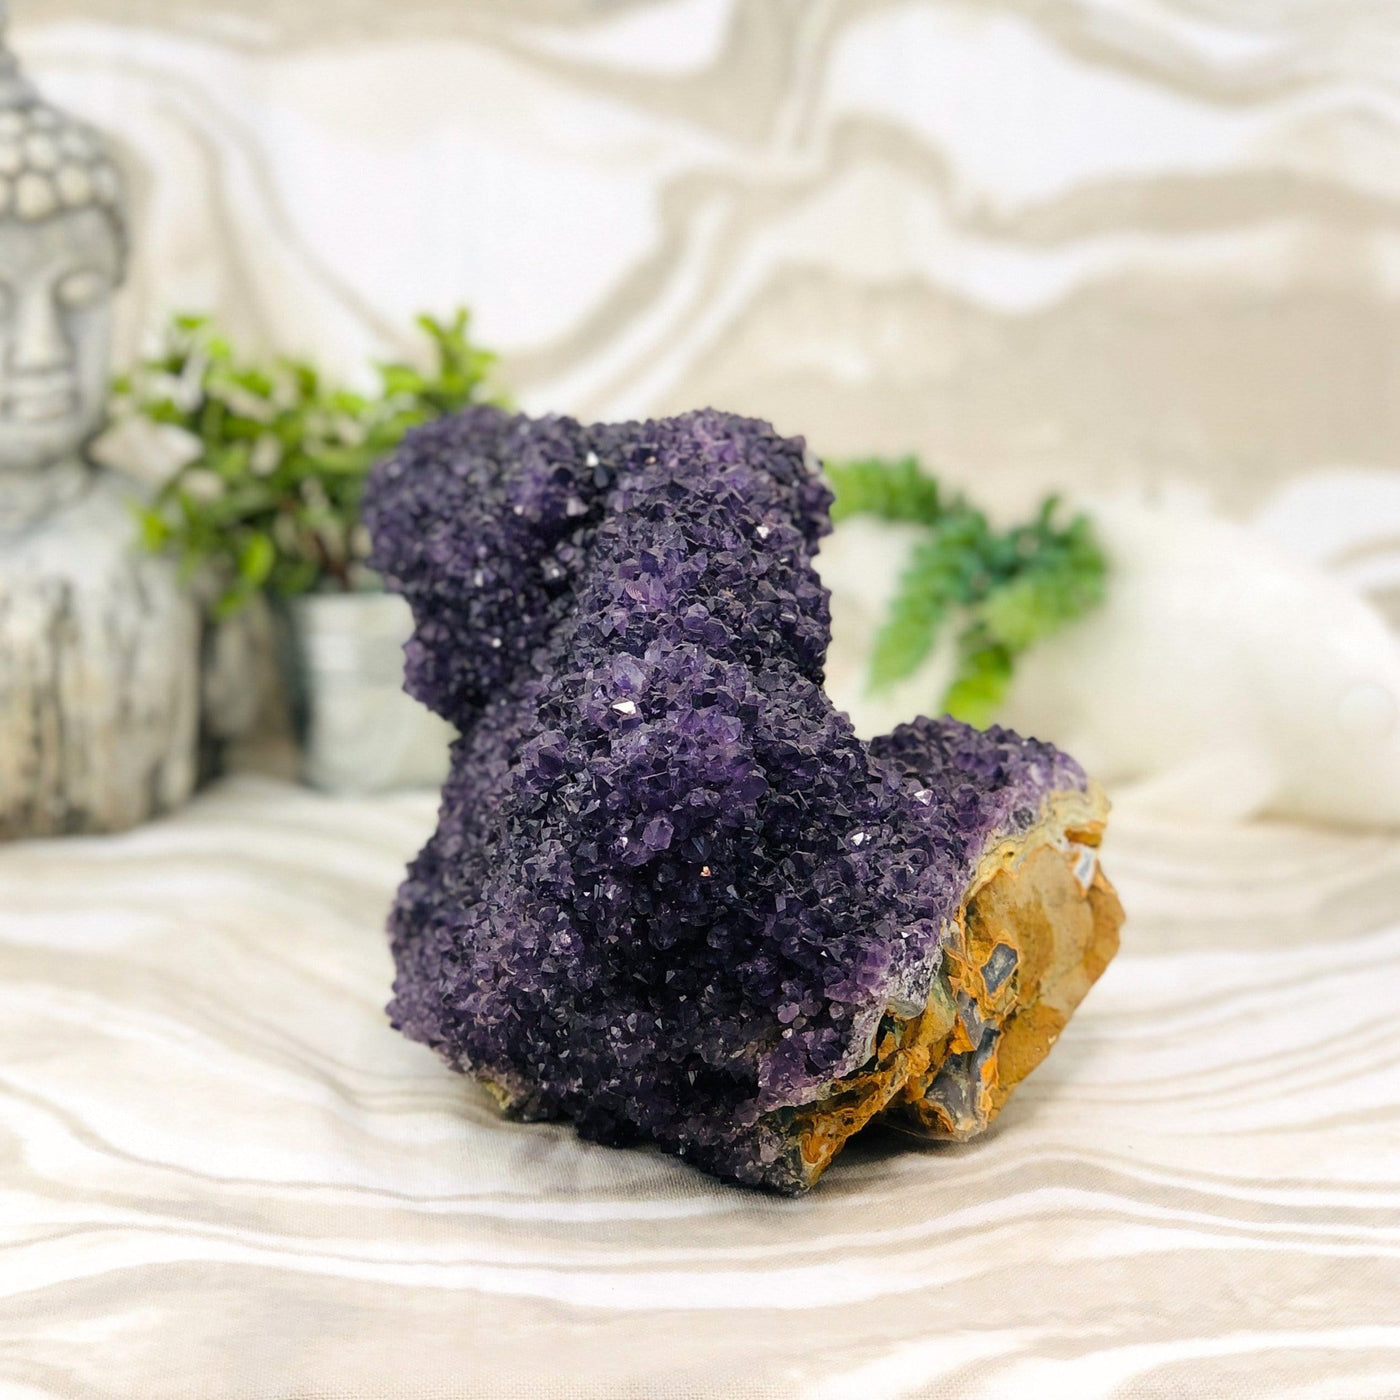 Amethyst Cluster Stalactite with decorations in the background